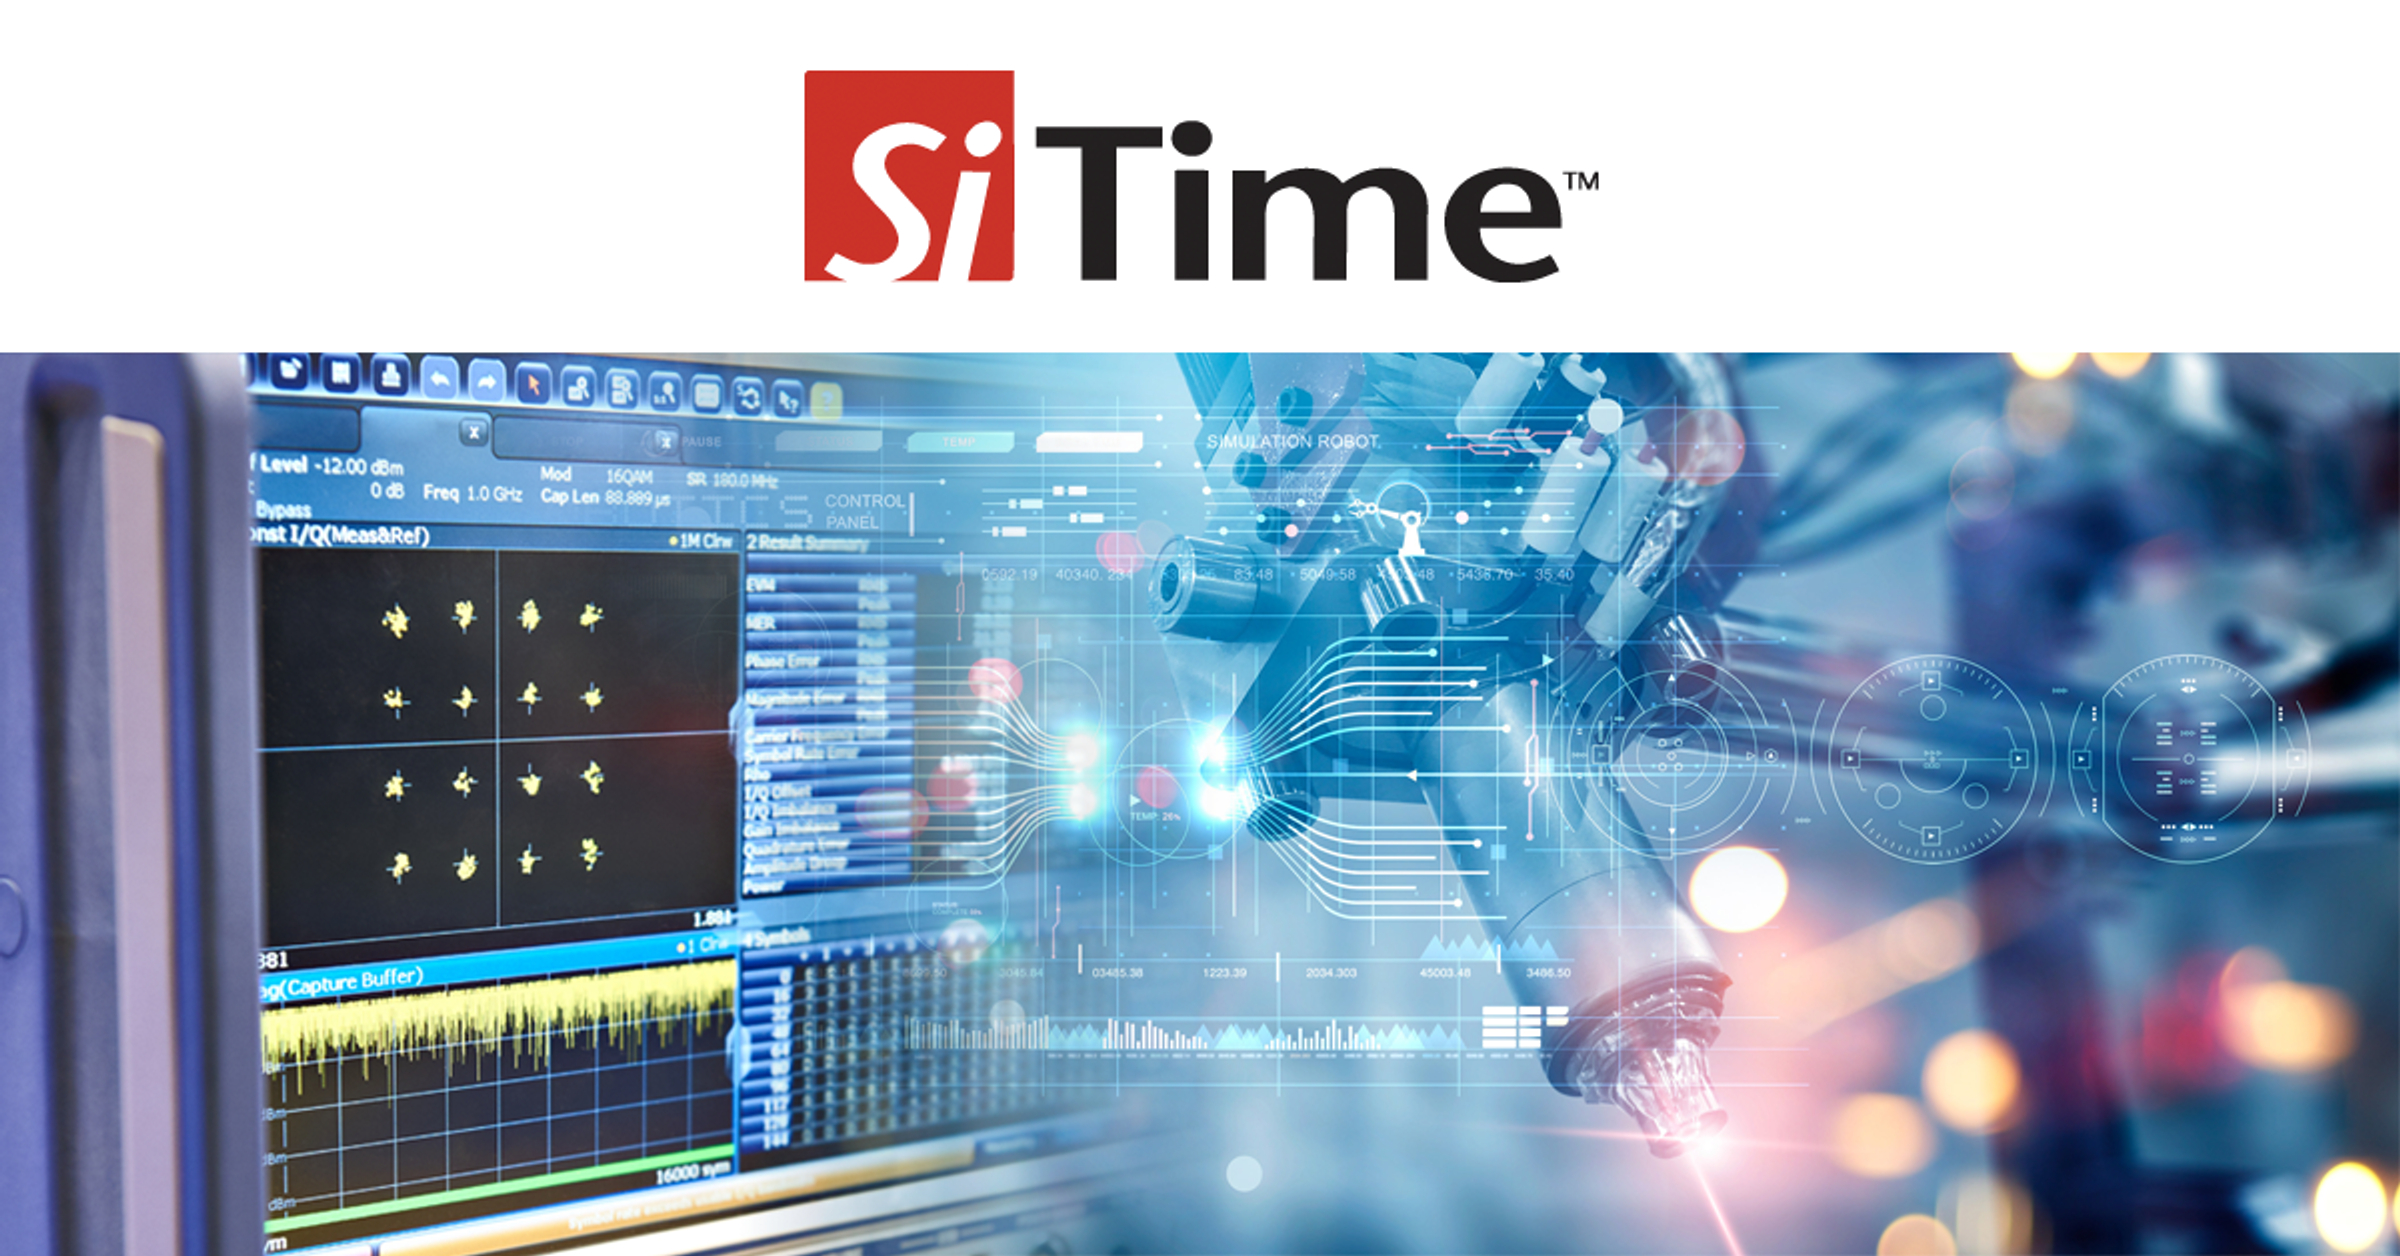 SiTime_timing_device_campaign_Apr_24.psd